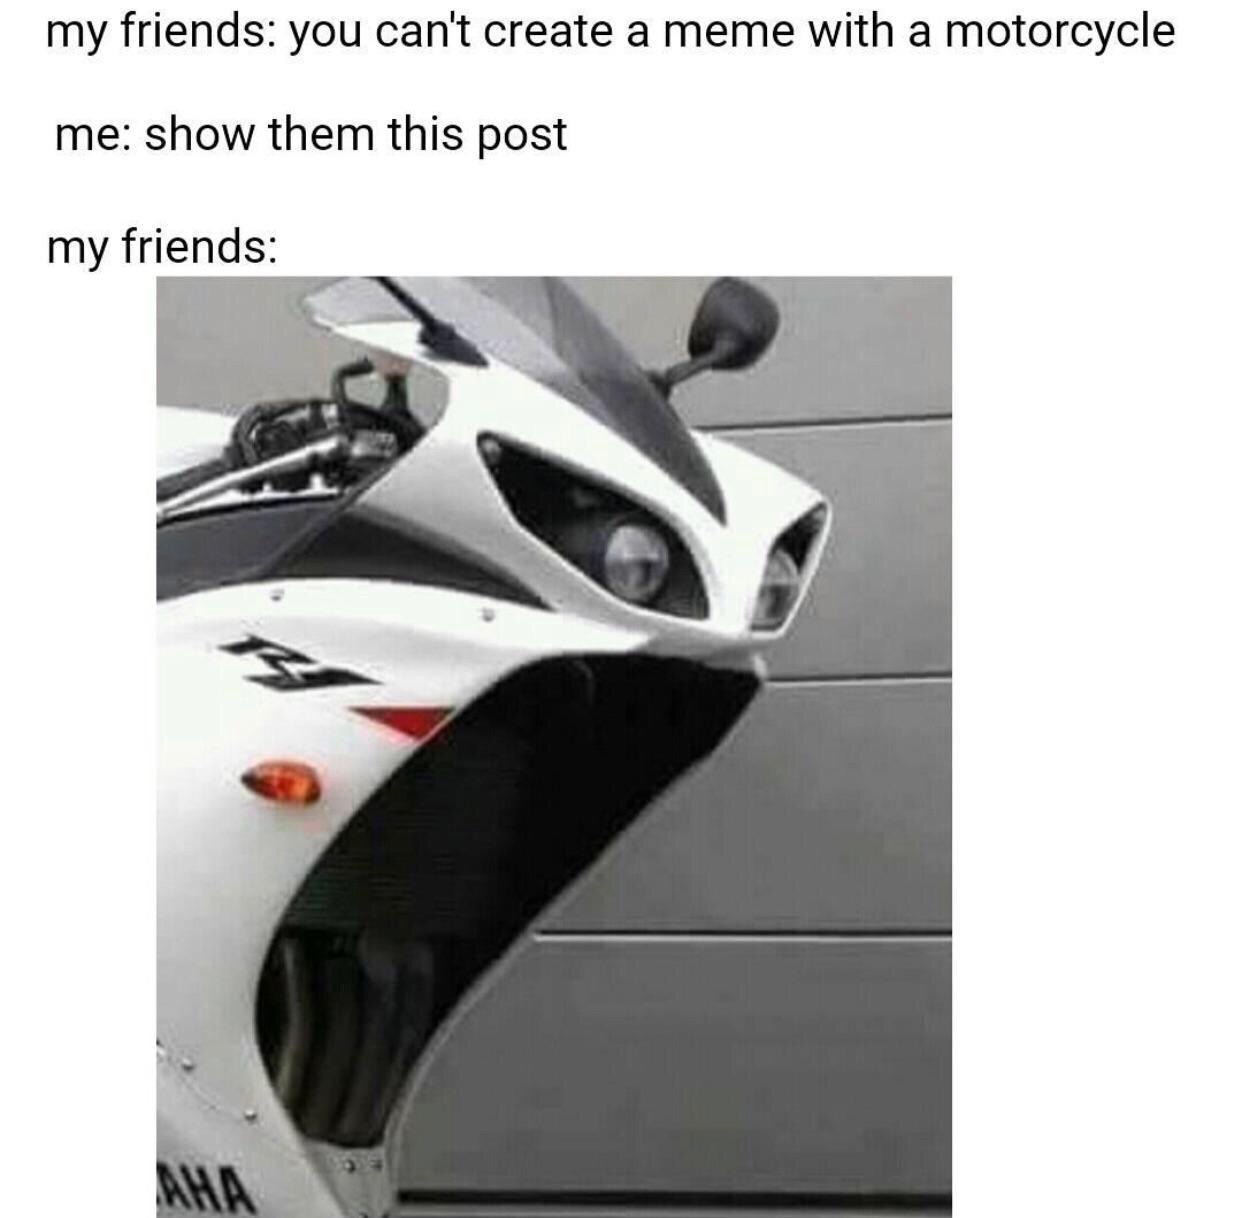 memes - motorcycle memes - my friends you can't create a meme with a motorcycle me show them this post my friends